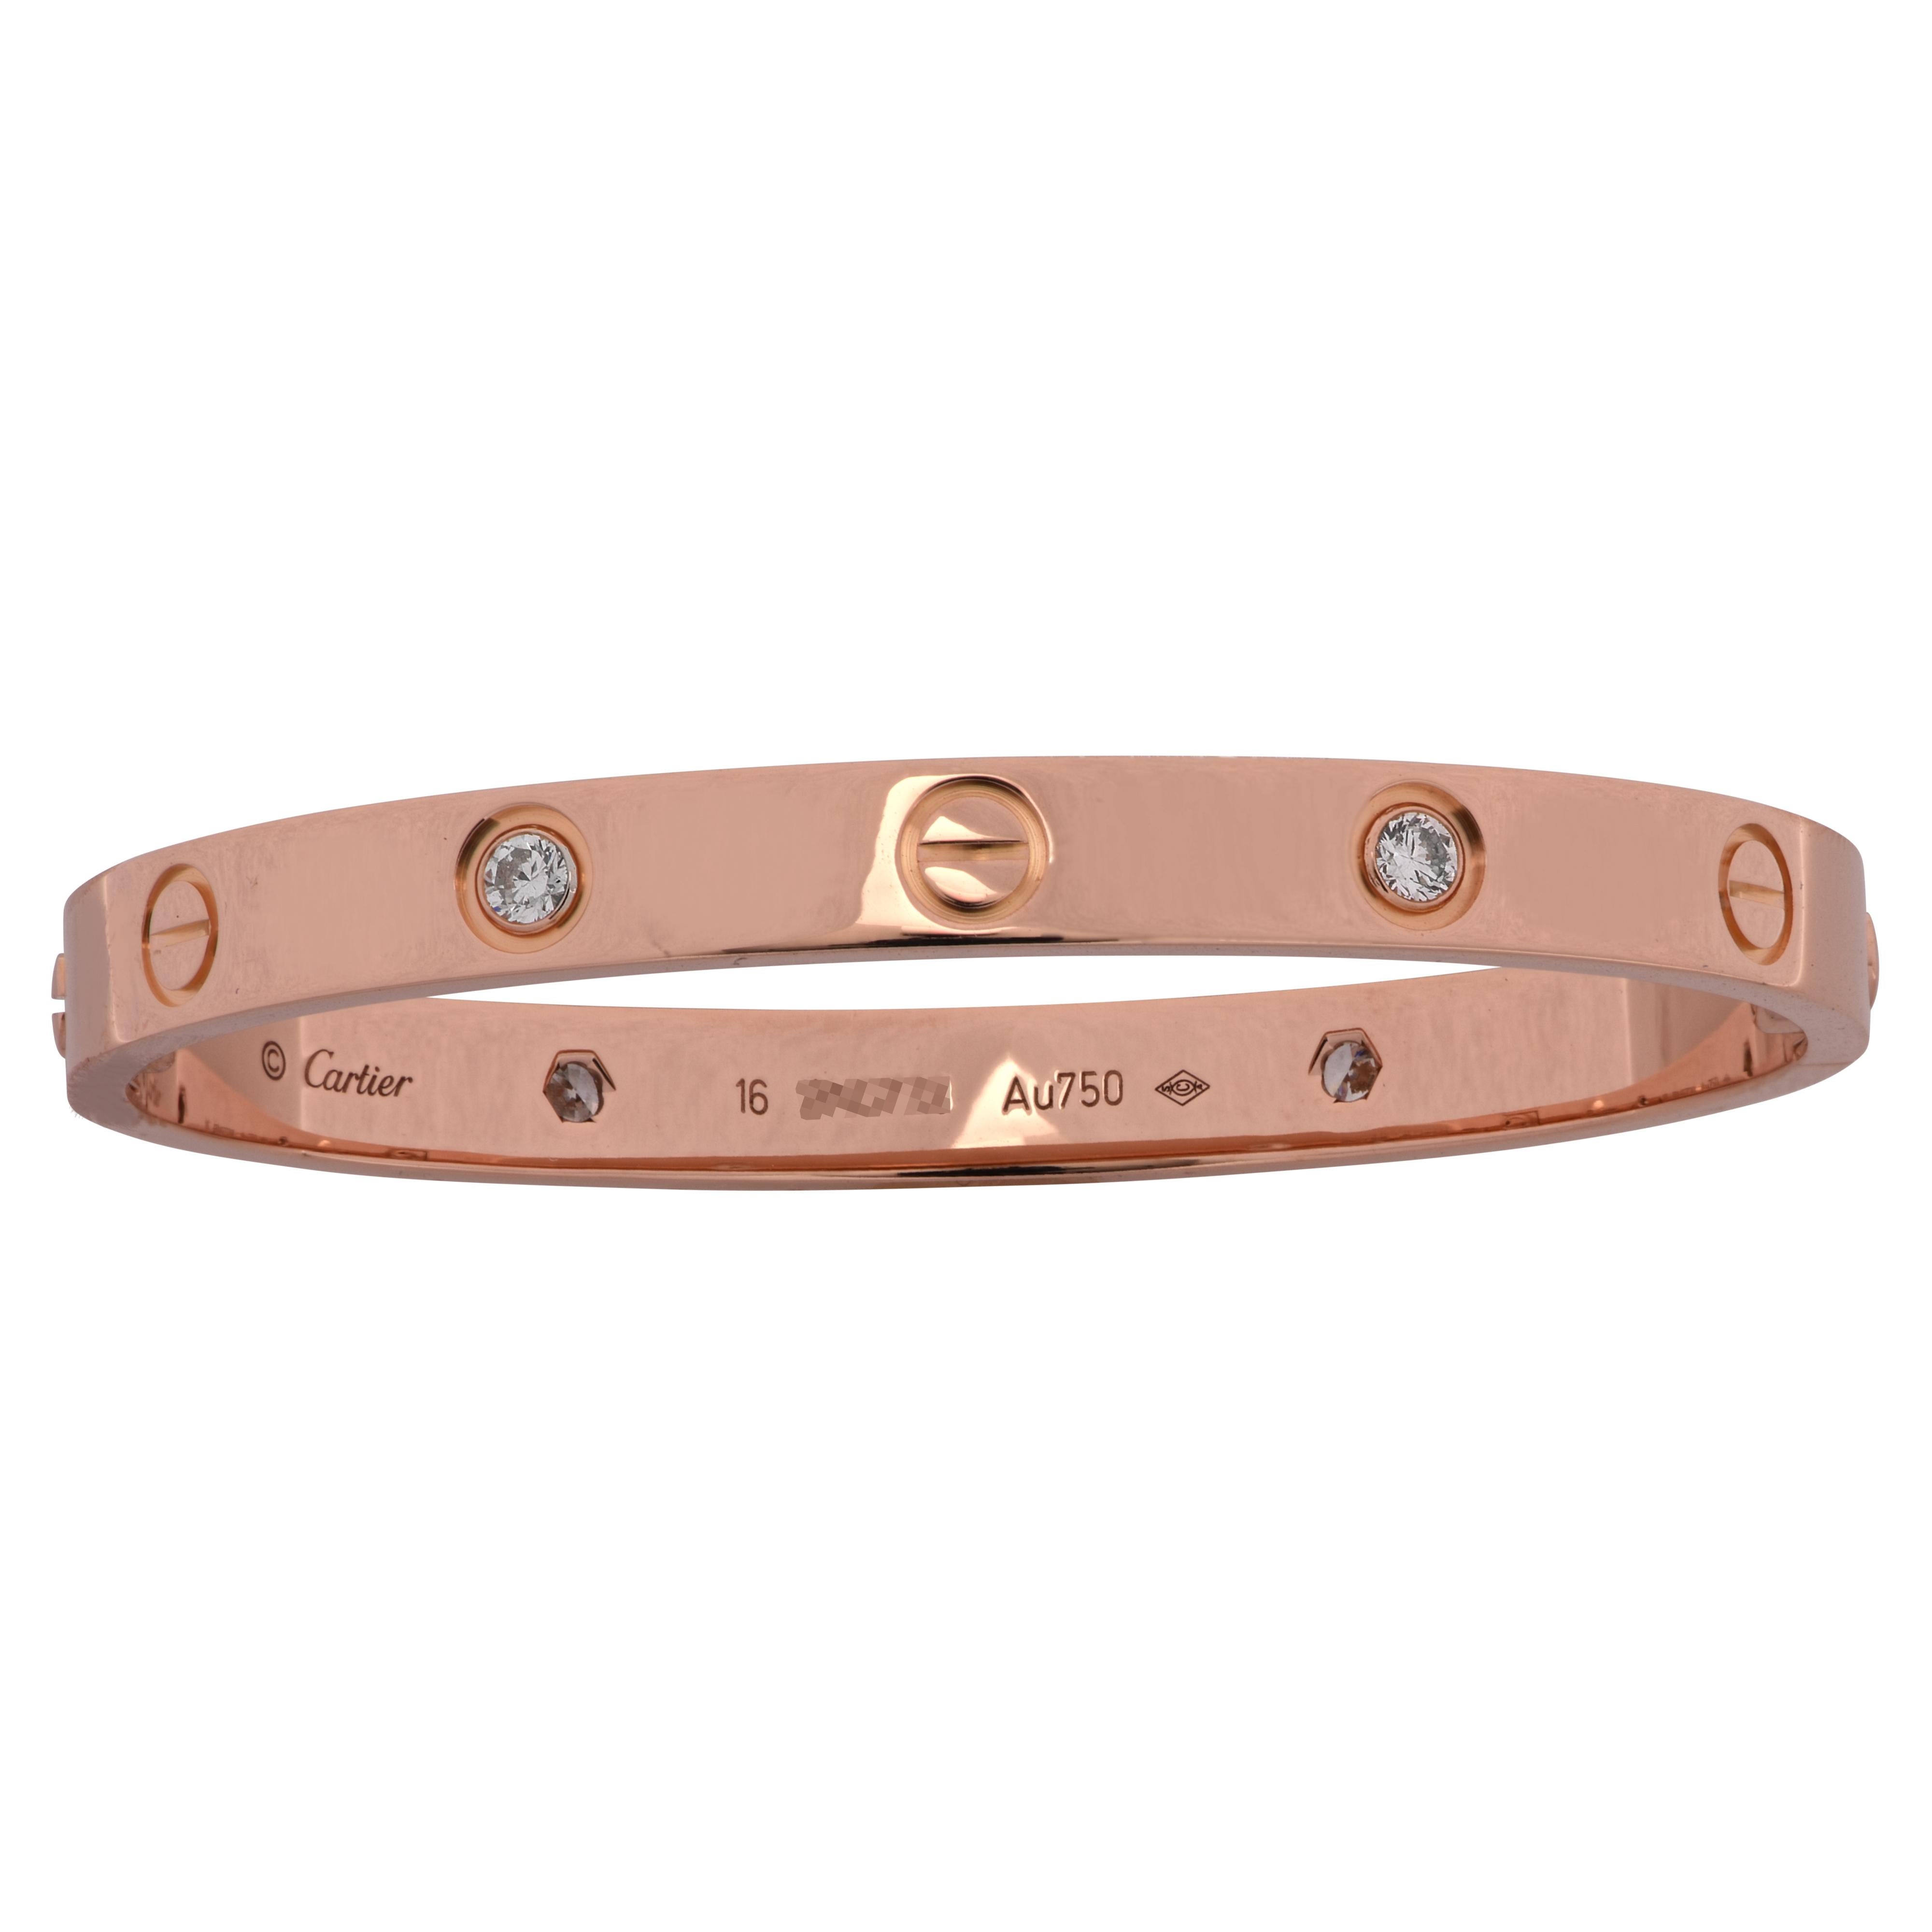 Cartier LOVE bracelet crafted in 18 Karat Rose Gold, featuring 4 round brilliant cut diamonds. The Cartier love collection has created a timeless tribute to the symbol of love that transcends through an iconic style originating from the 1970s. The